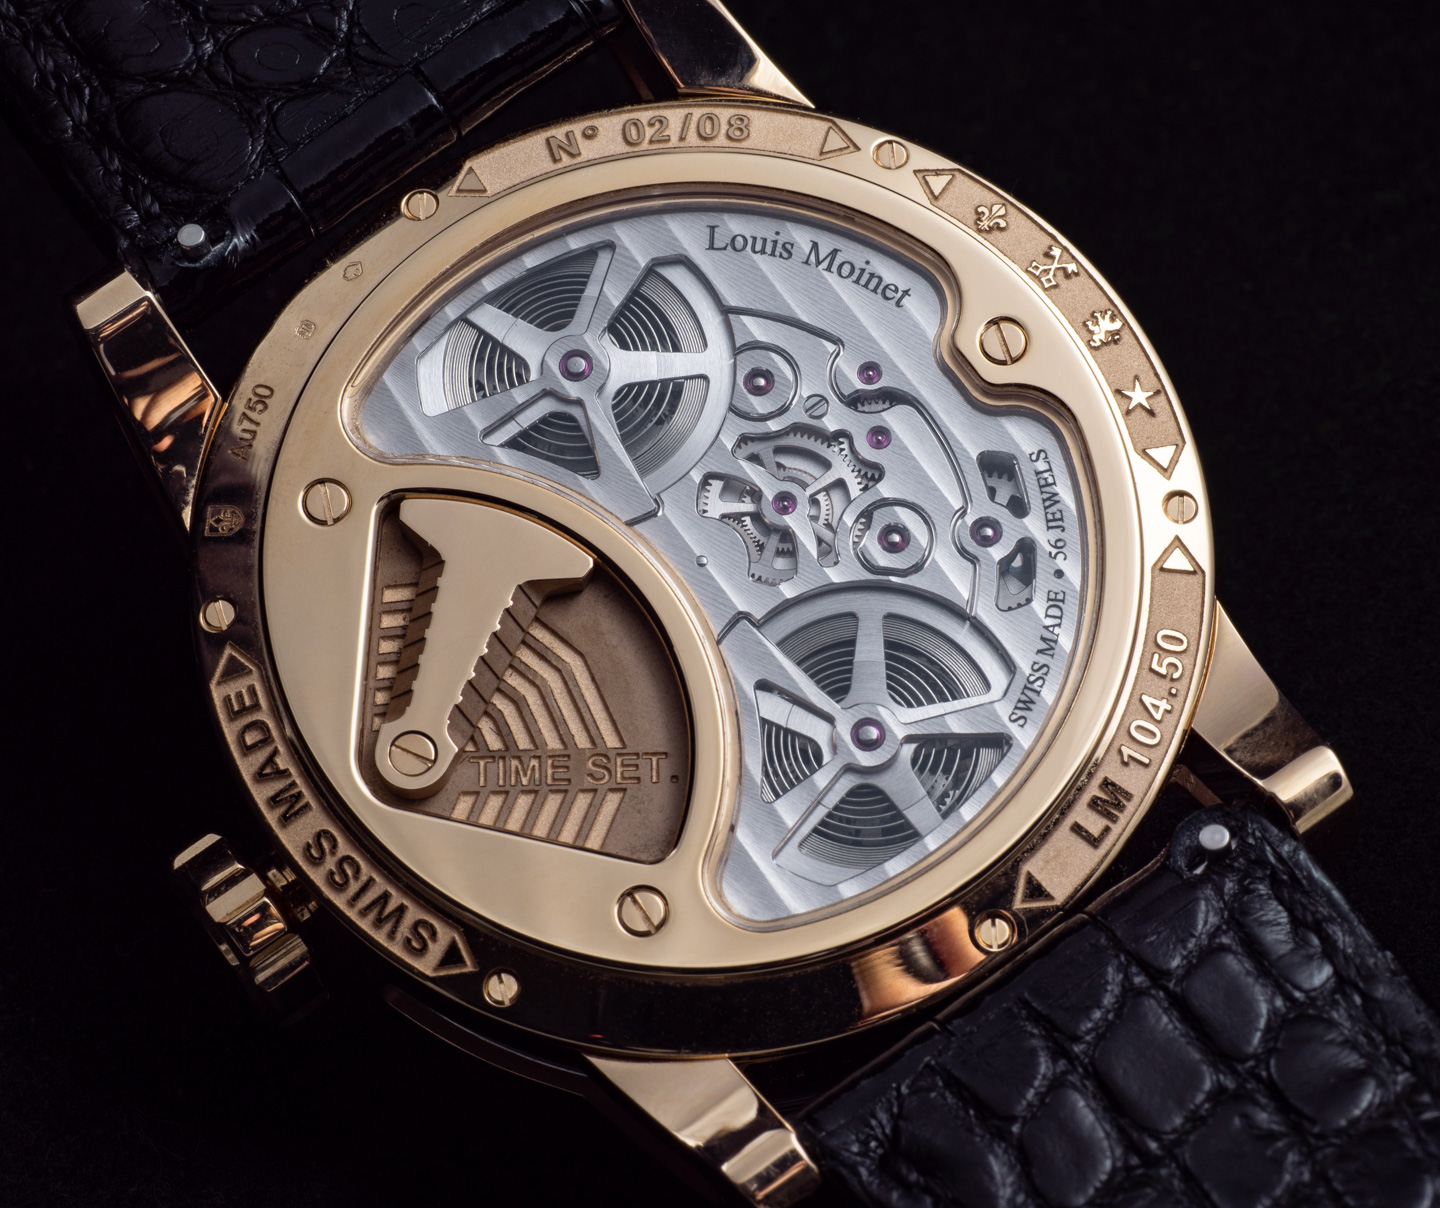 INTERVIEW: The Louis Moinet Space Revolution Watch & Wearable Art